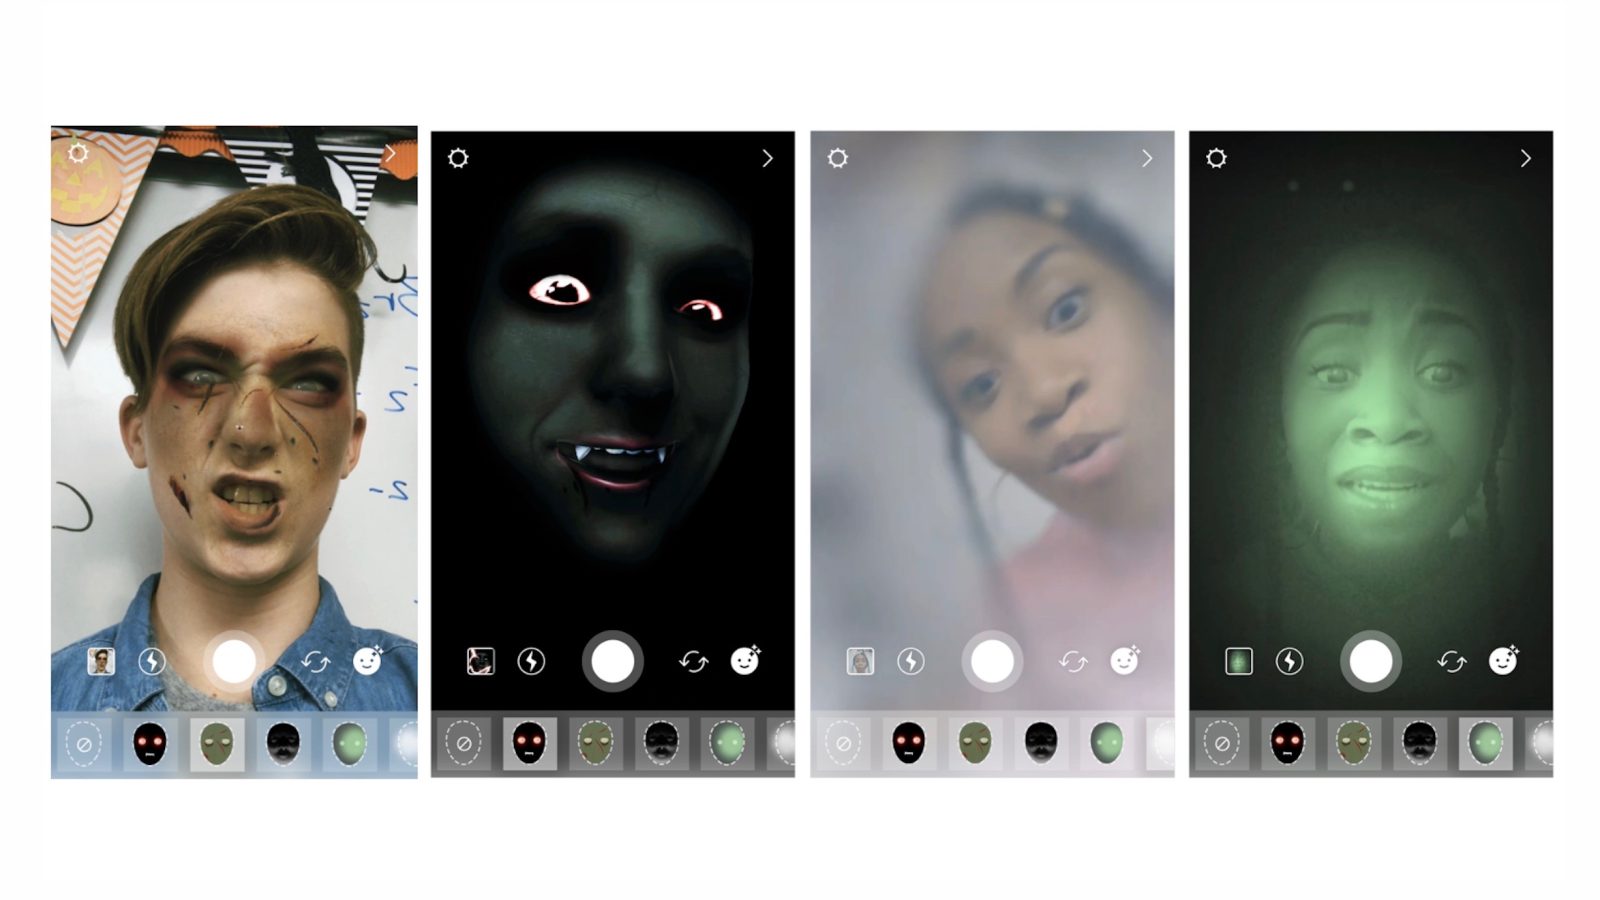  Instagram  releases Halloween themed face filters  and 